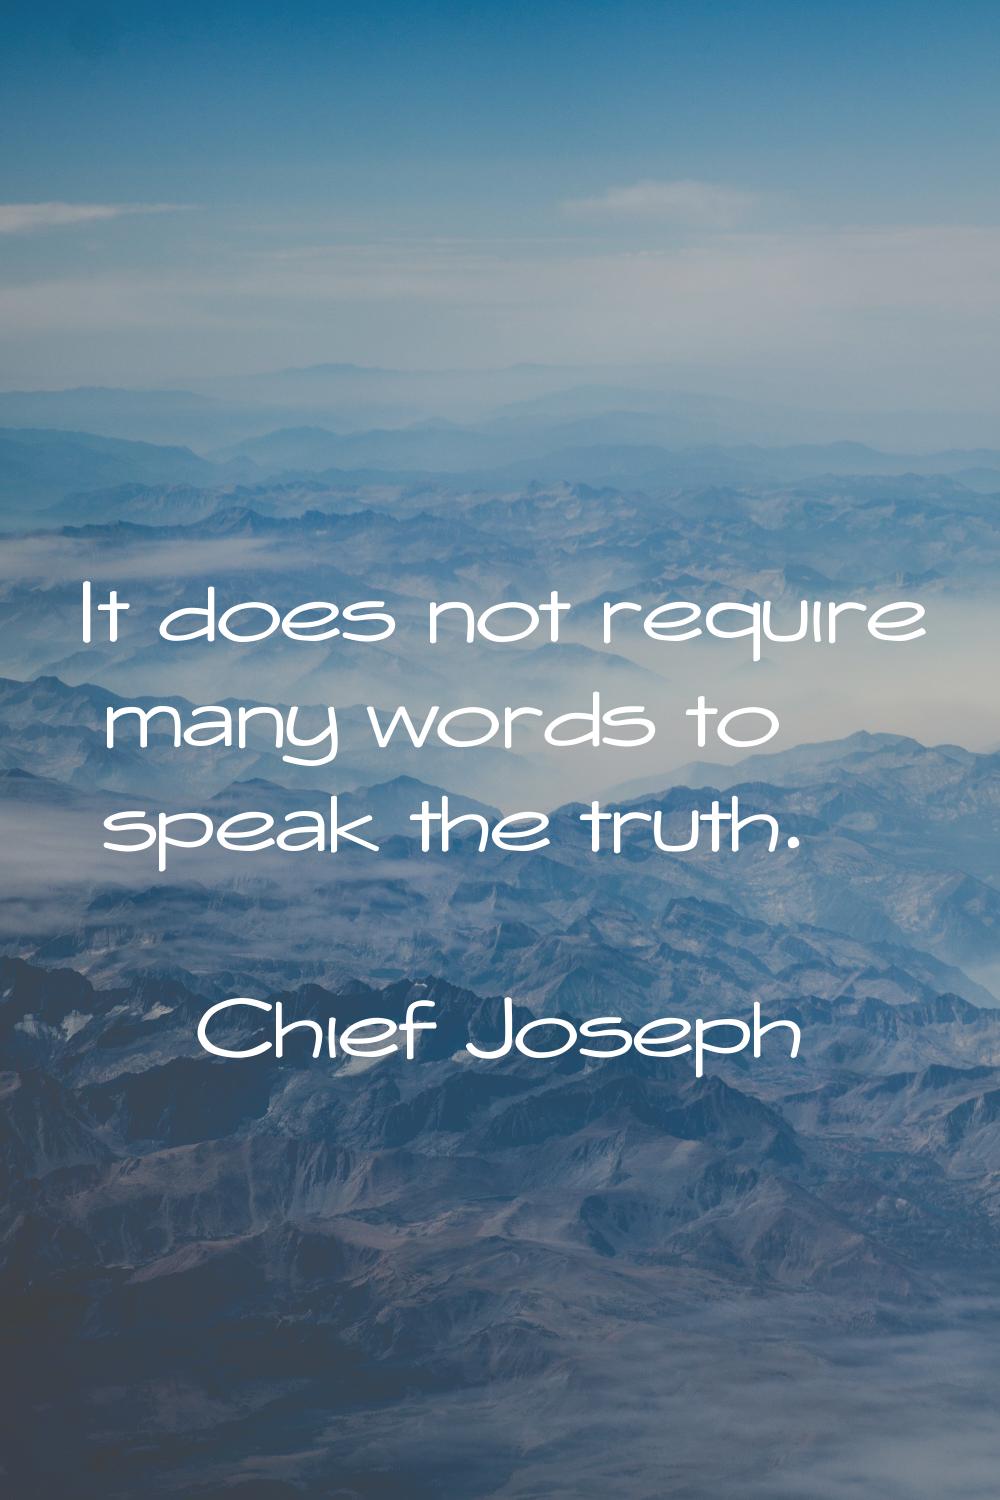 It does not require many words to speak the truth.